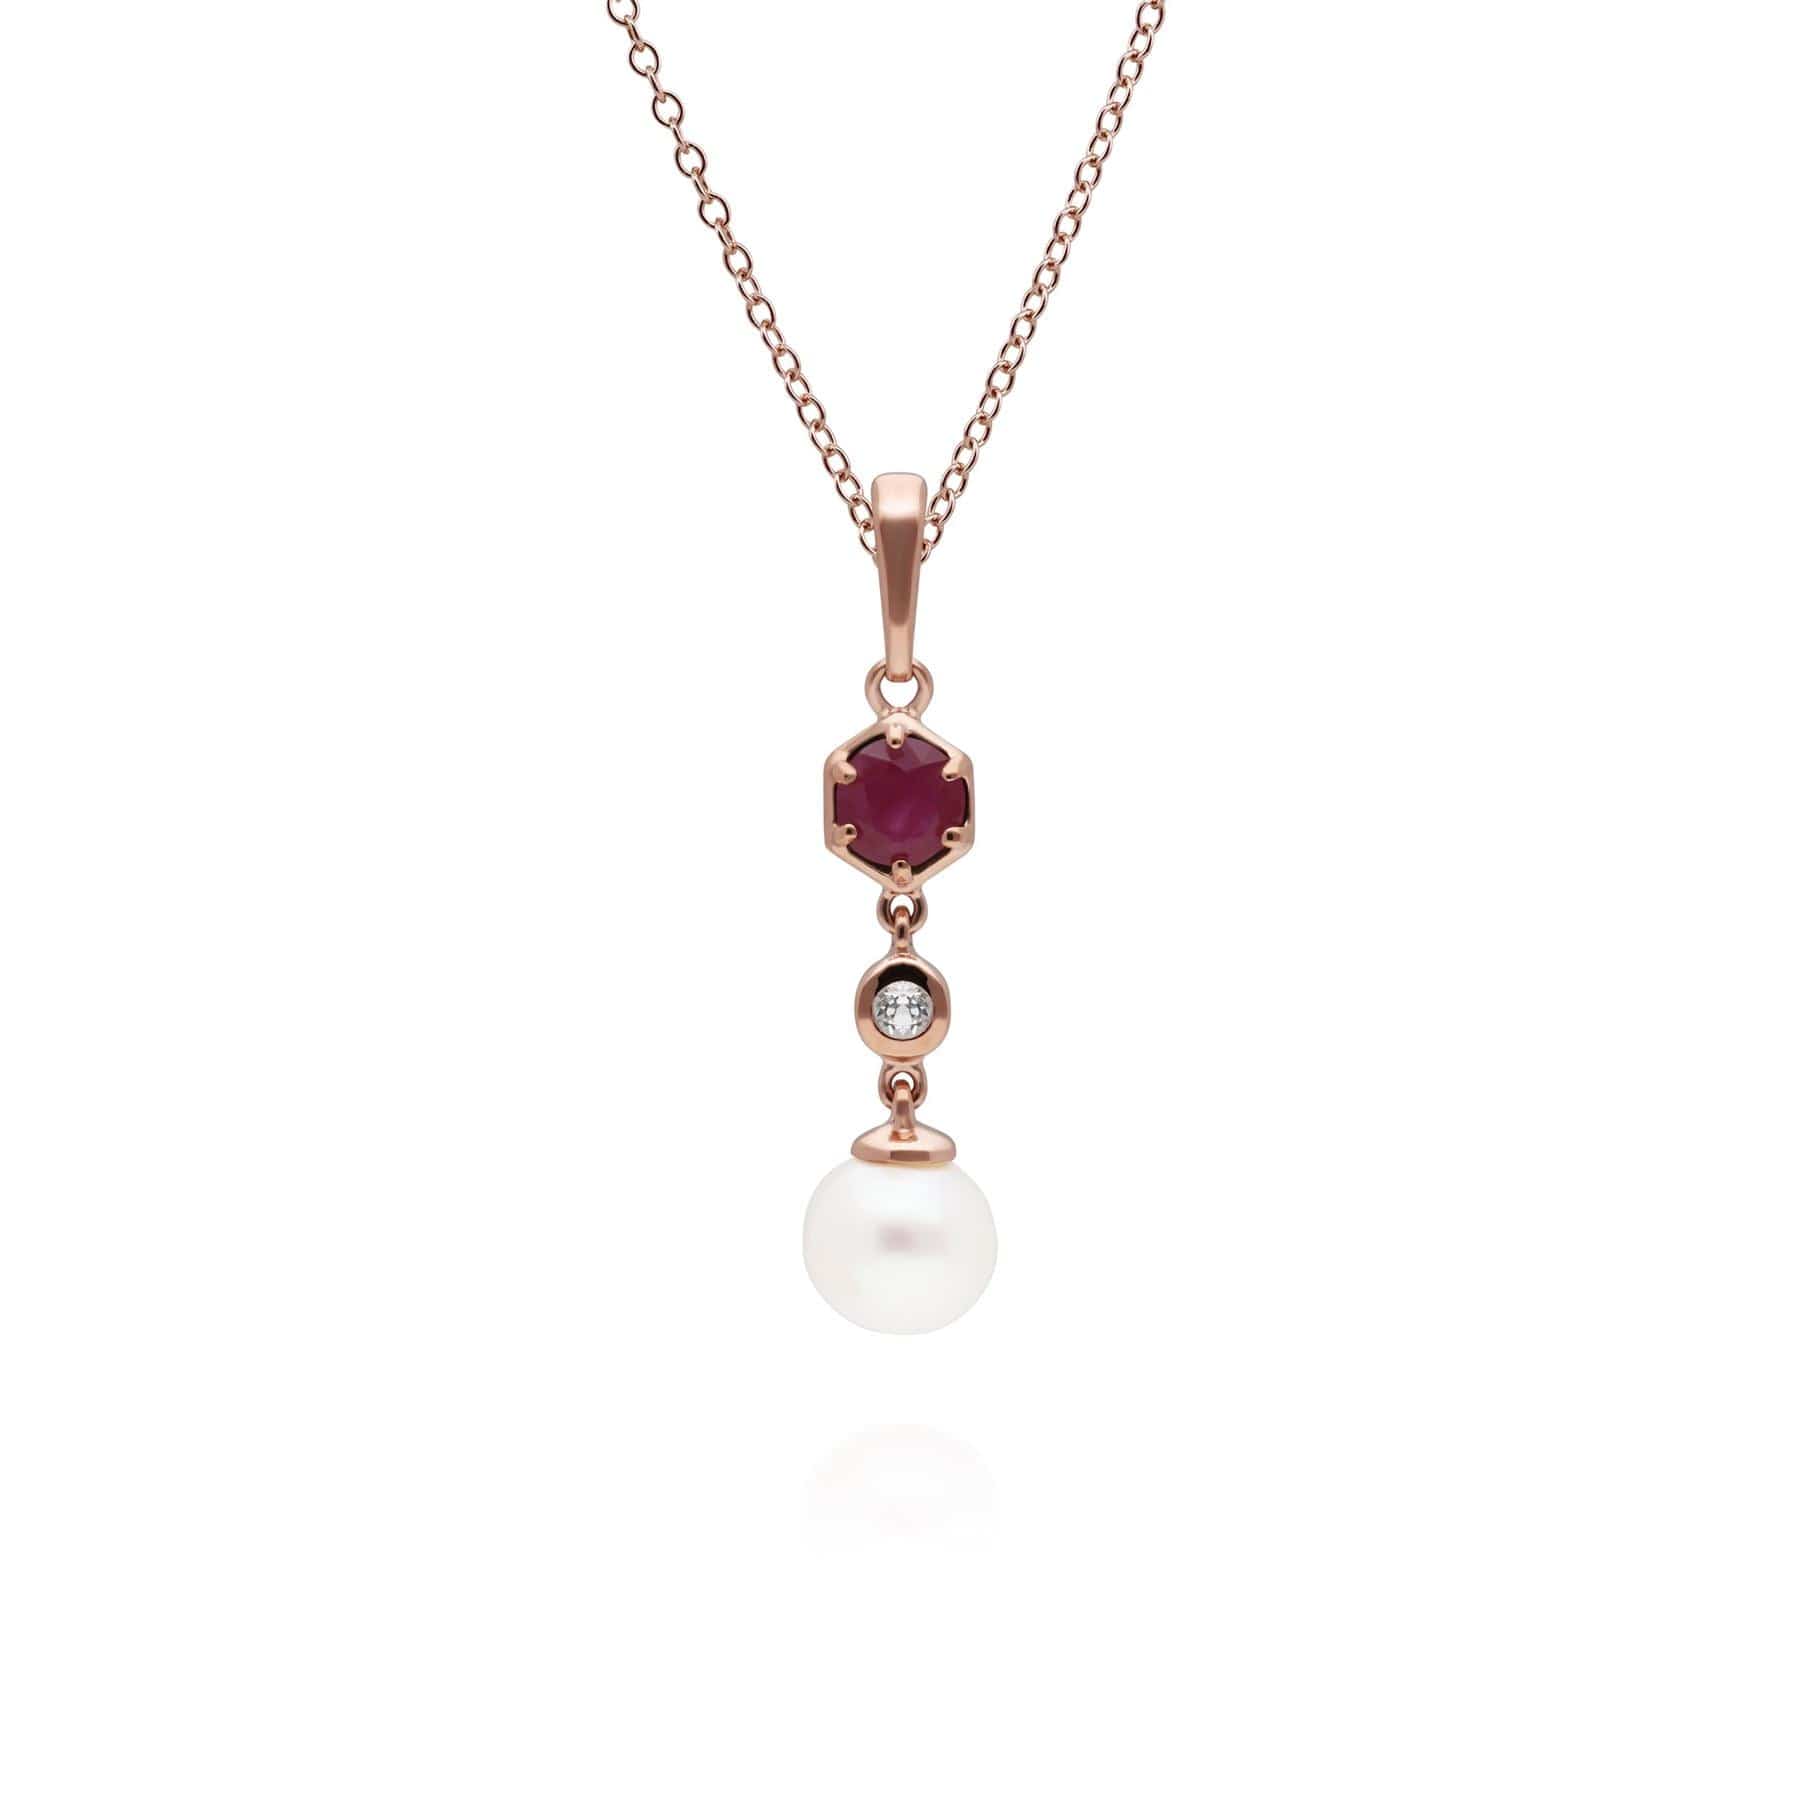 Photos - Pendant / Choker Necklace Modern Pearl, Ruby & Topaz Drop Pendant in Rose Gold Plated Silver